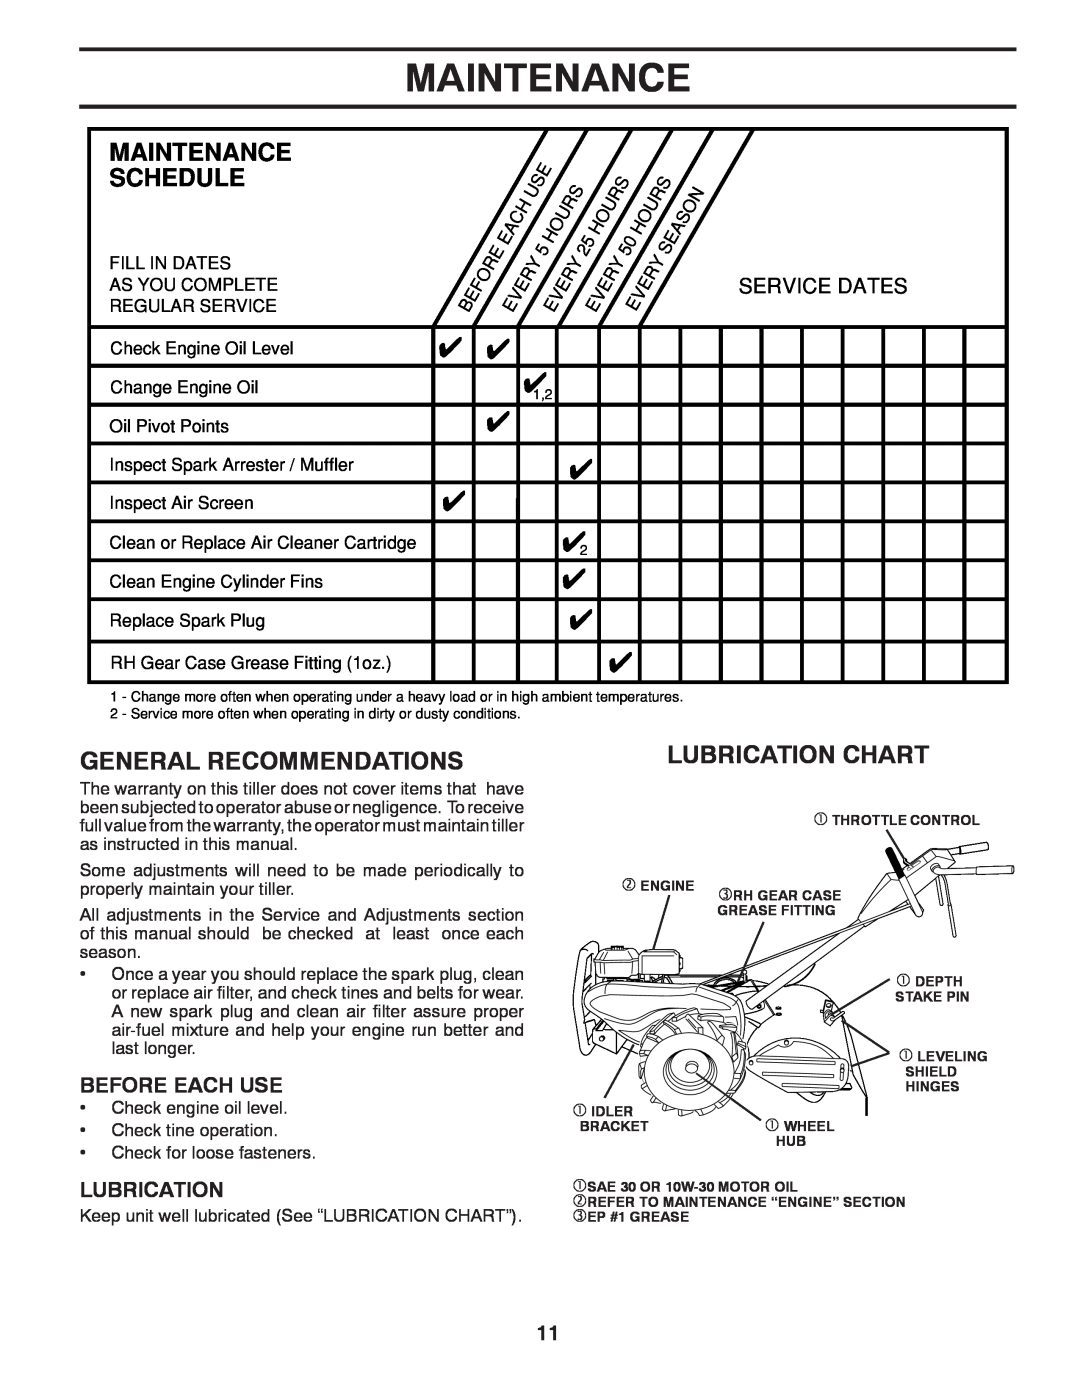 Poulan 96092001500 General Recommendations, Lubrication Chart, Before Each Use, Maintenance Schedule, Service Dates 